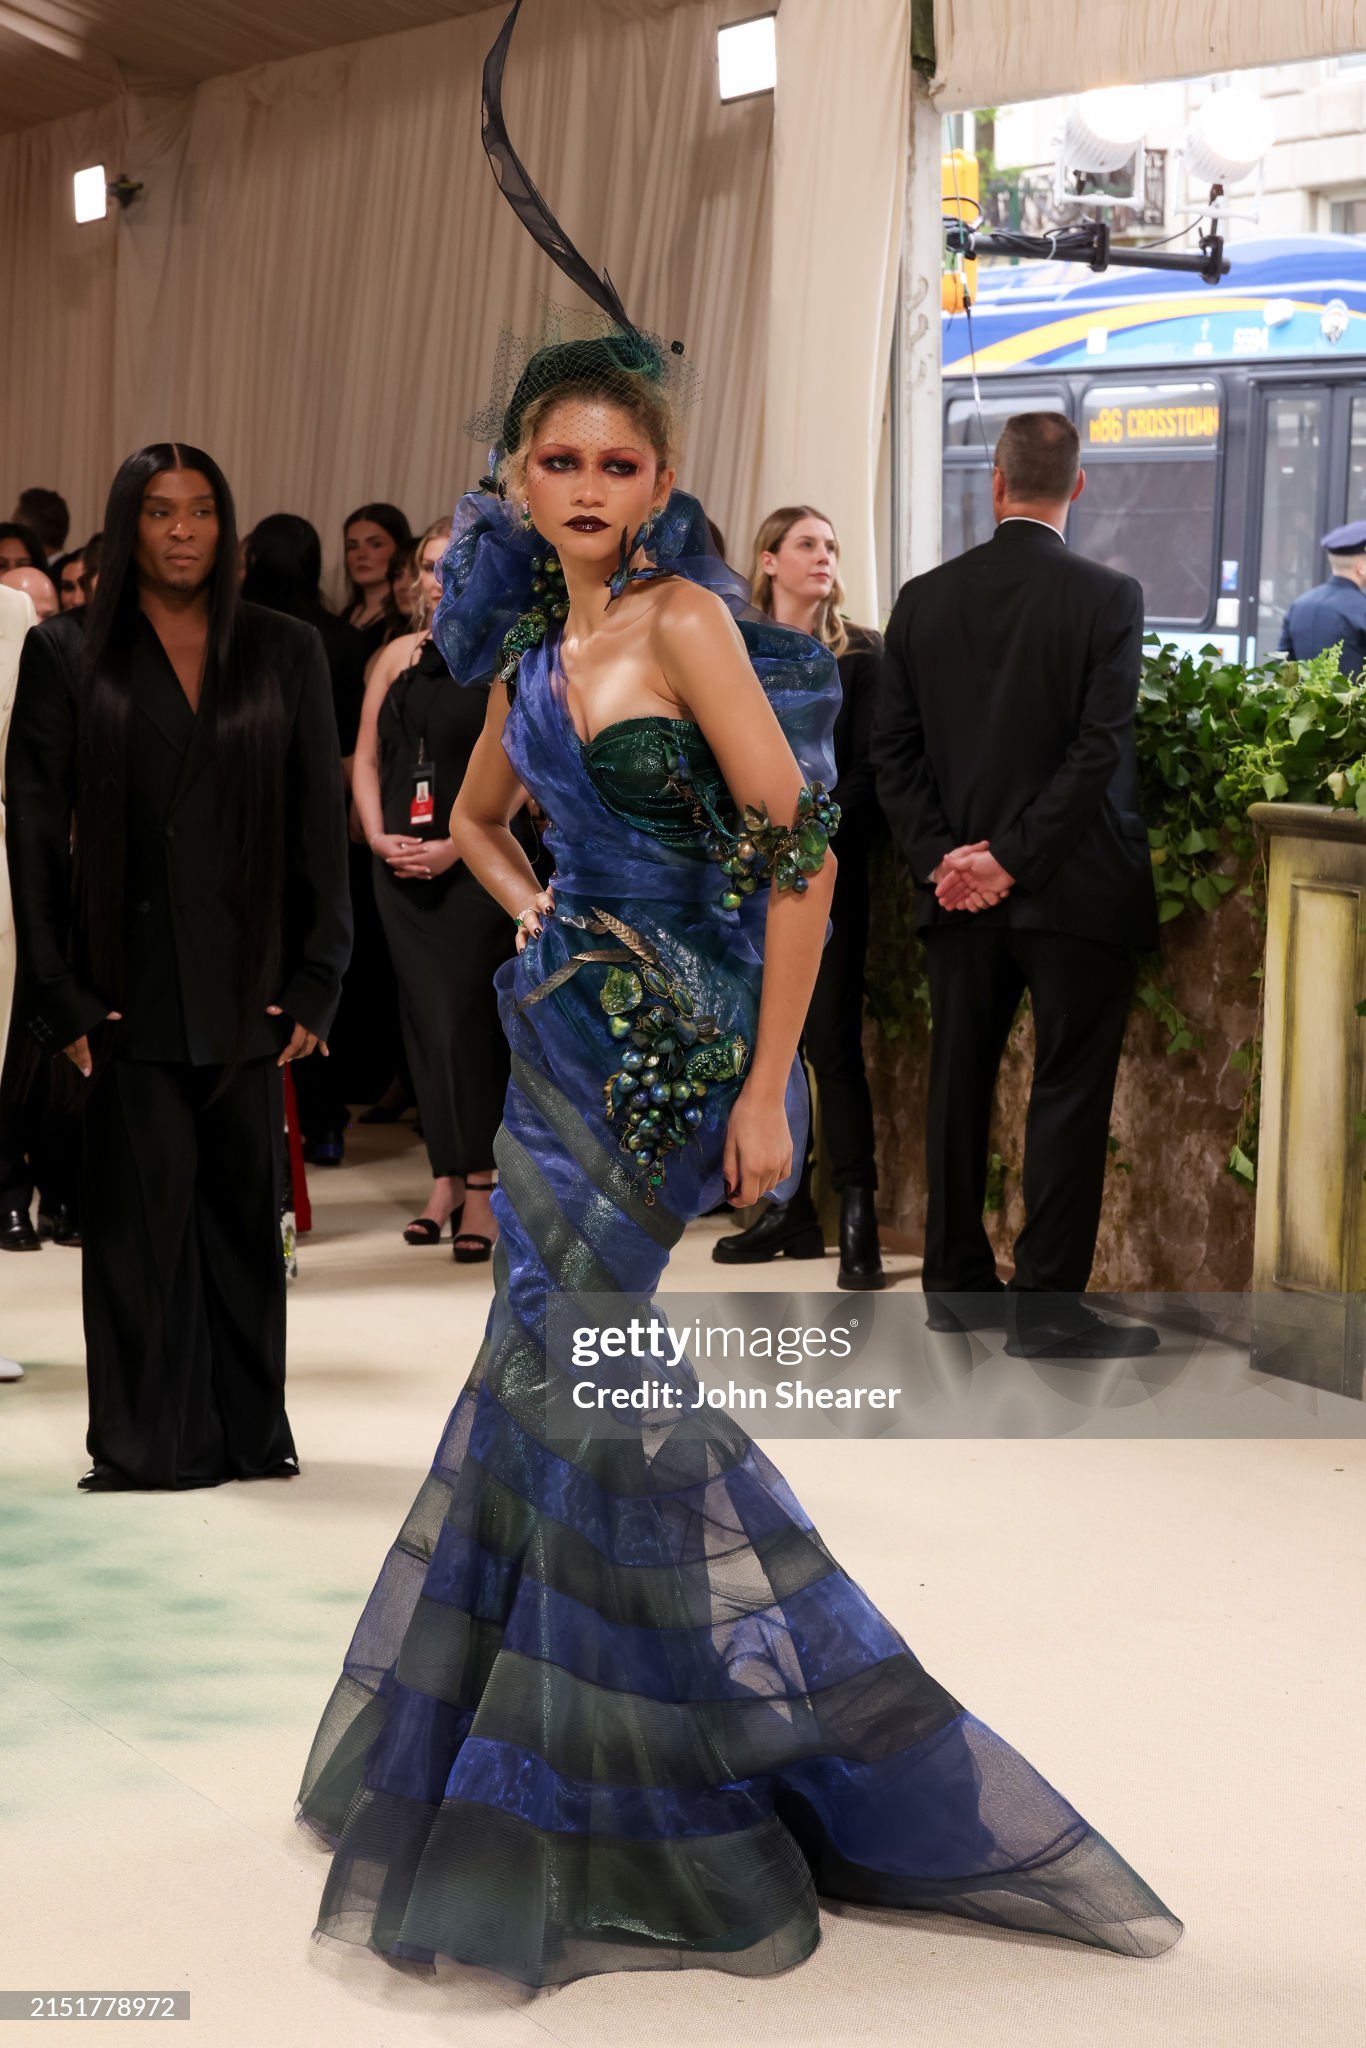 gettyimages-2151778972-2048x2048.jpg